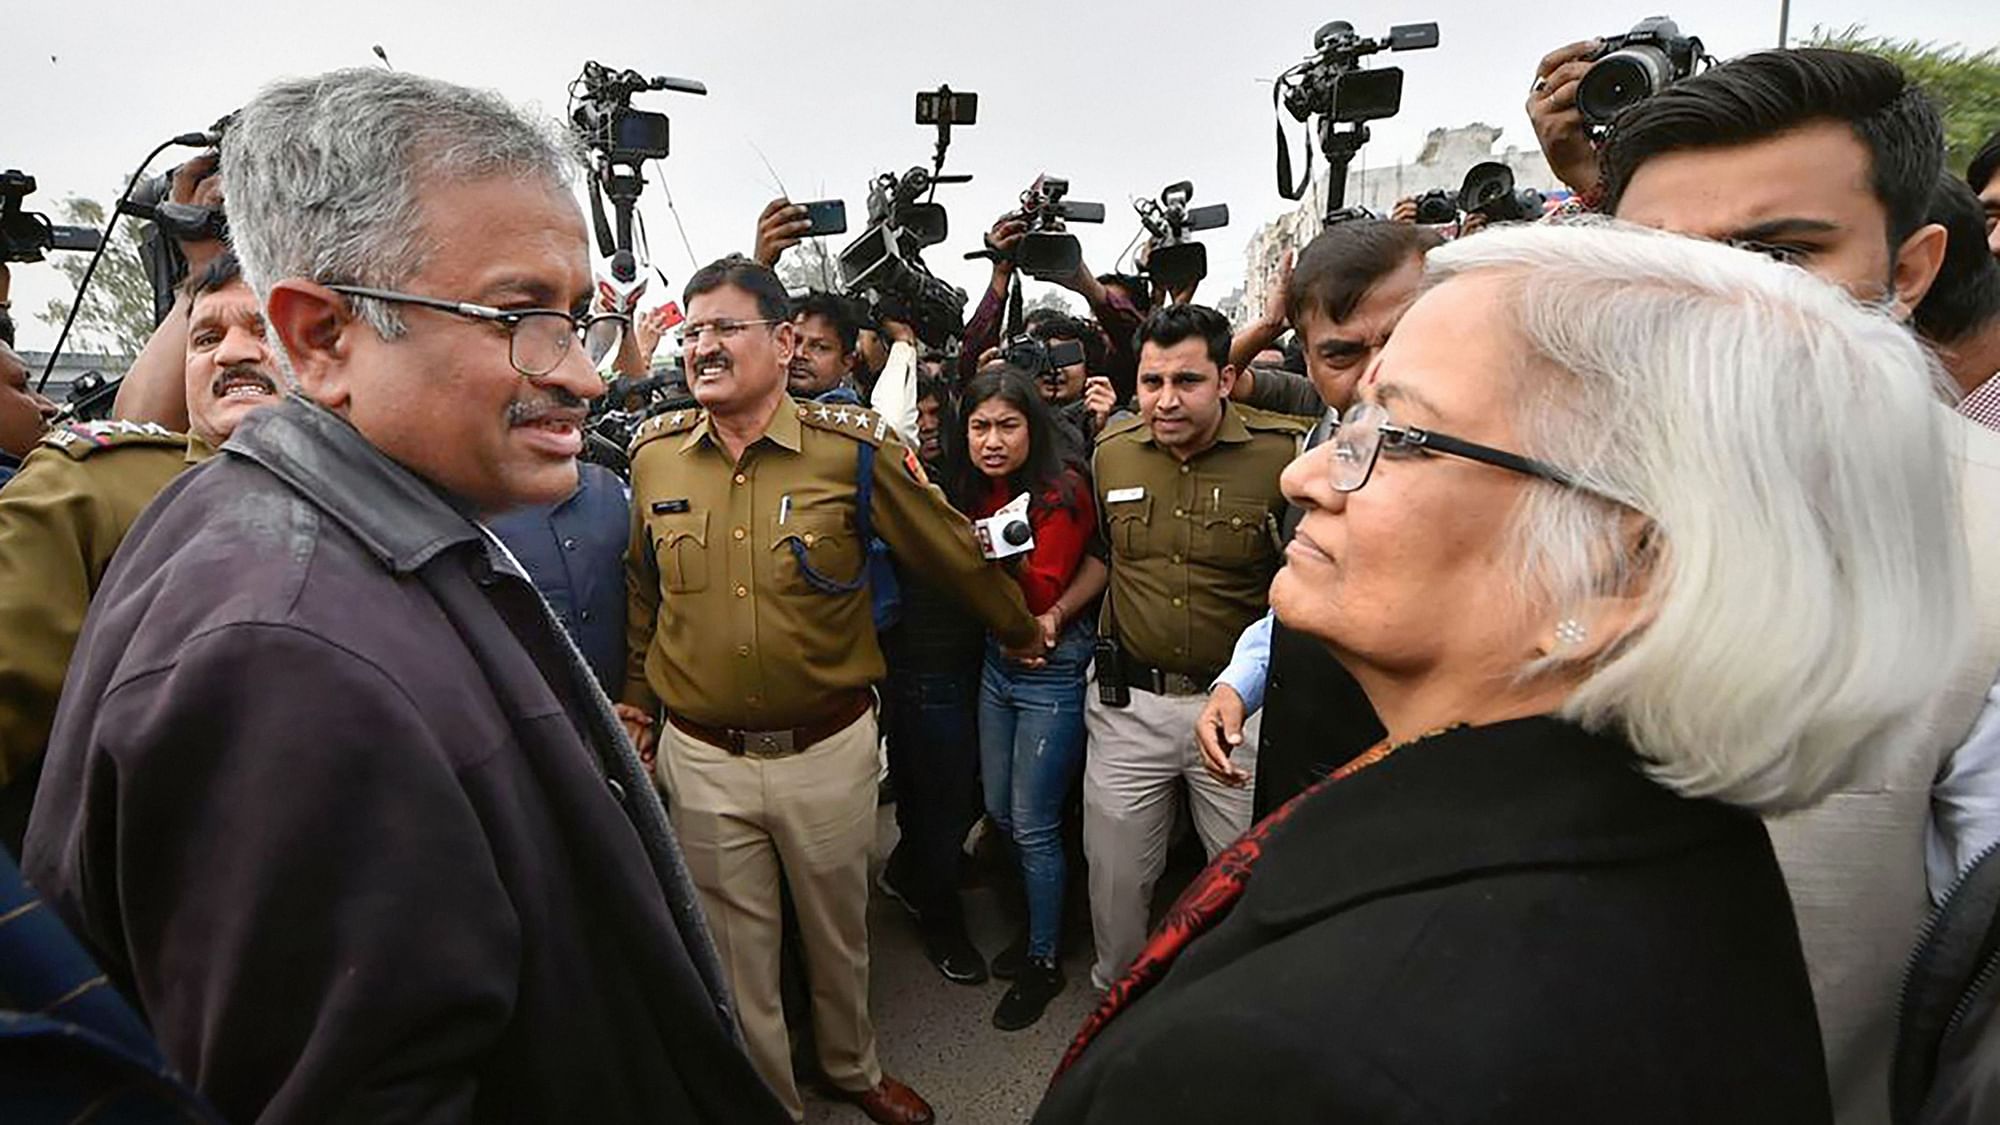 Sanjay Hegde and Sadhana Ramachandran, mediators appointed by Supreme Court, at Shaheen Bagh in New Delhi on Wednesday, 19 February.